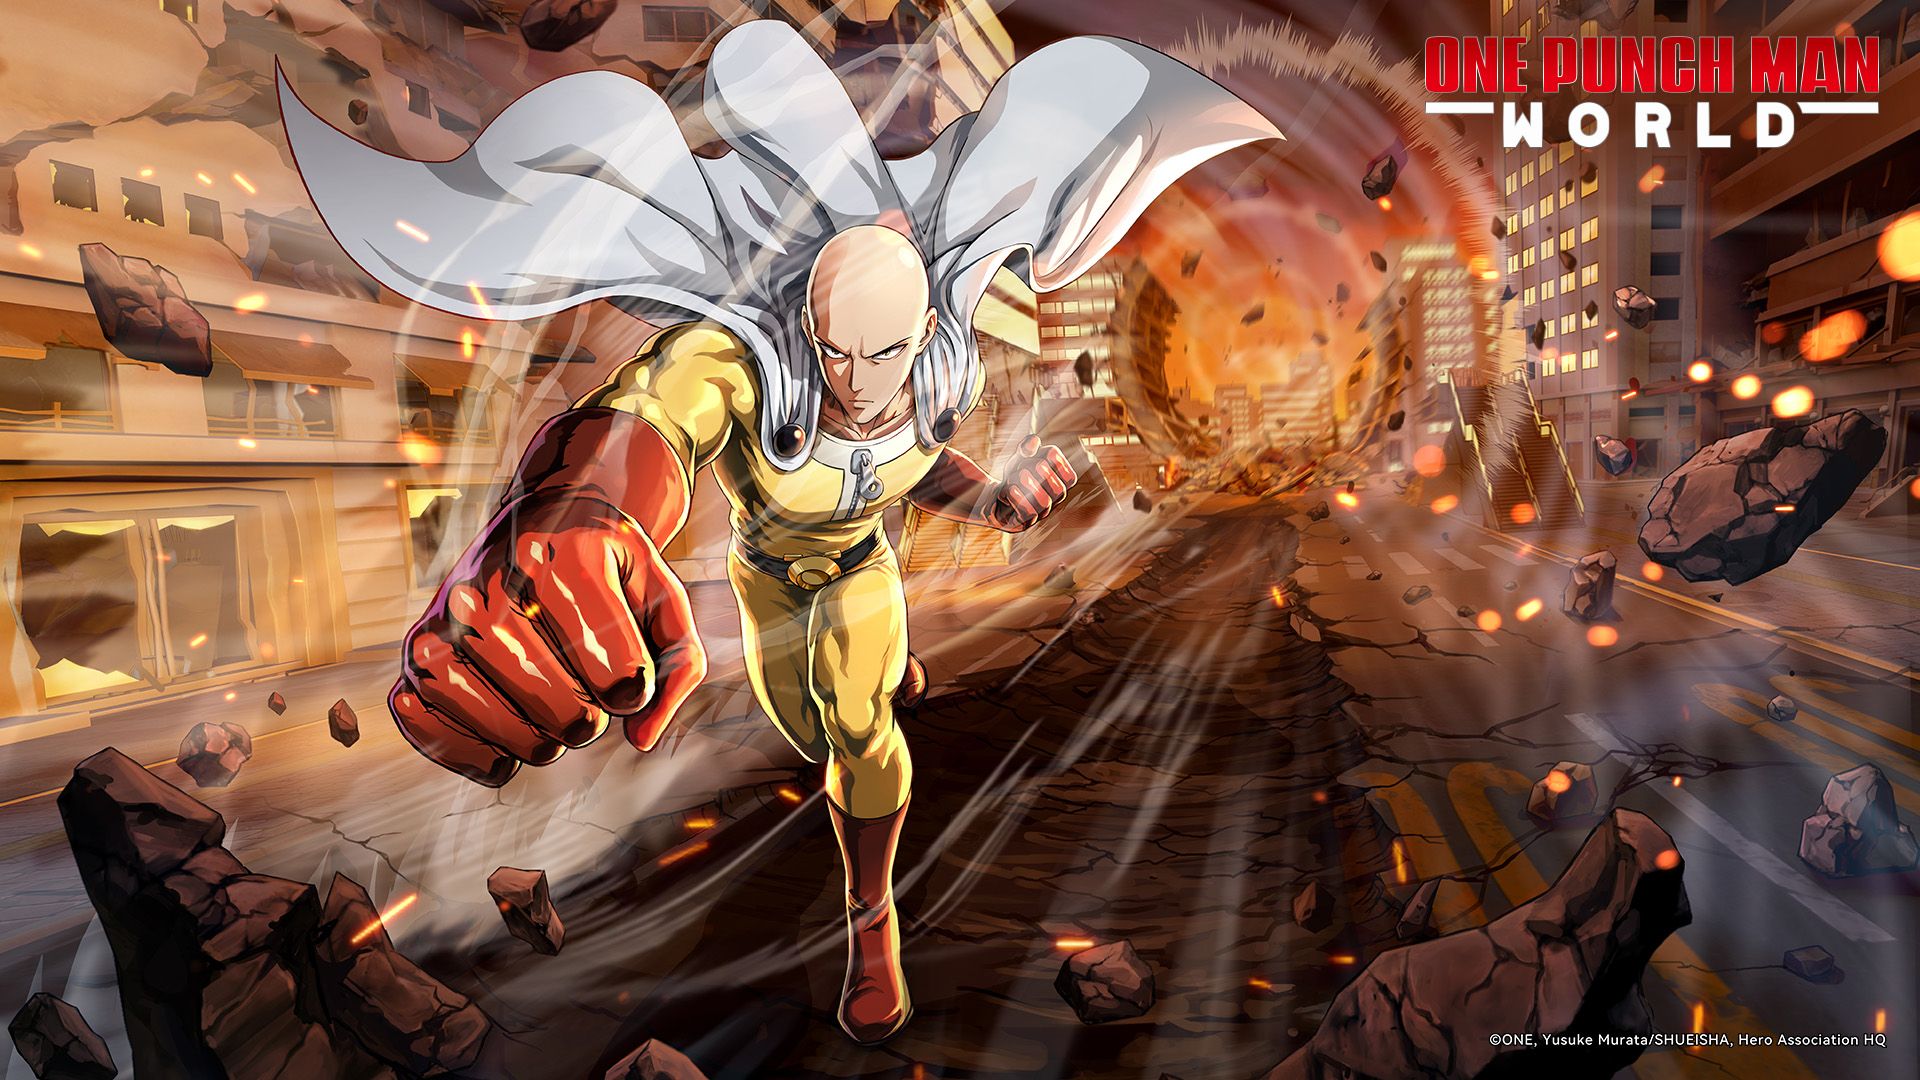 One Punch Man: World - Official Announcement Trailer - IGN